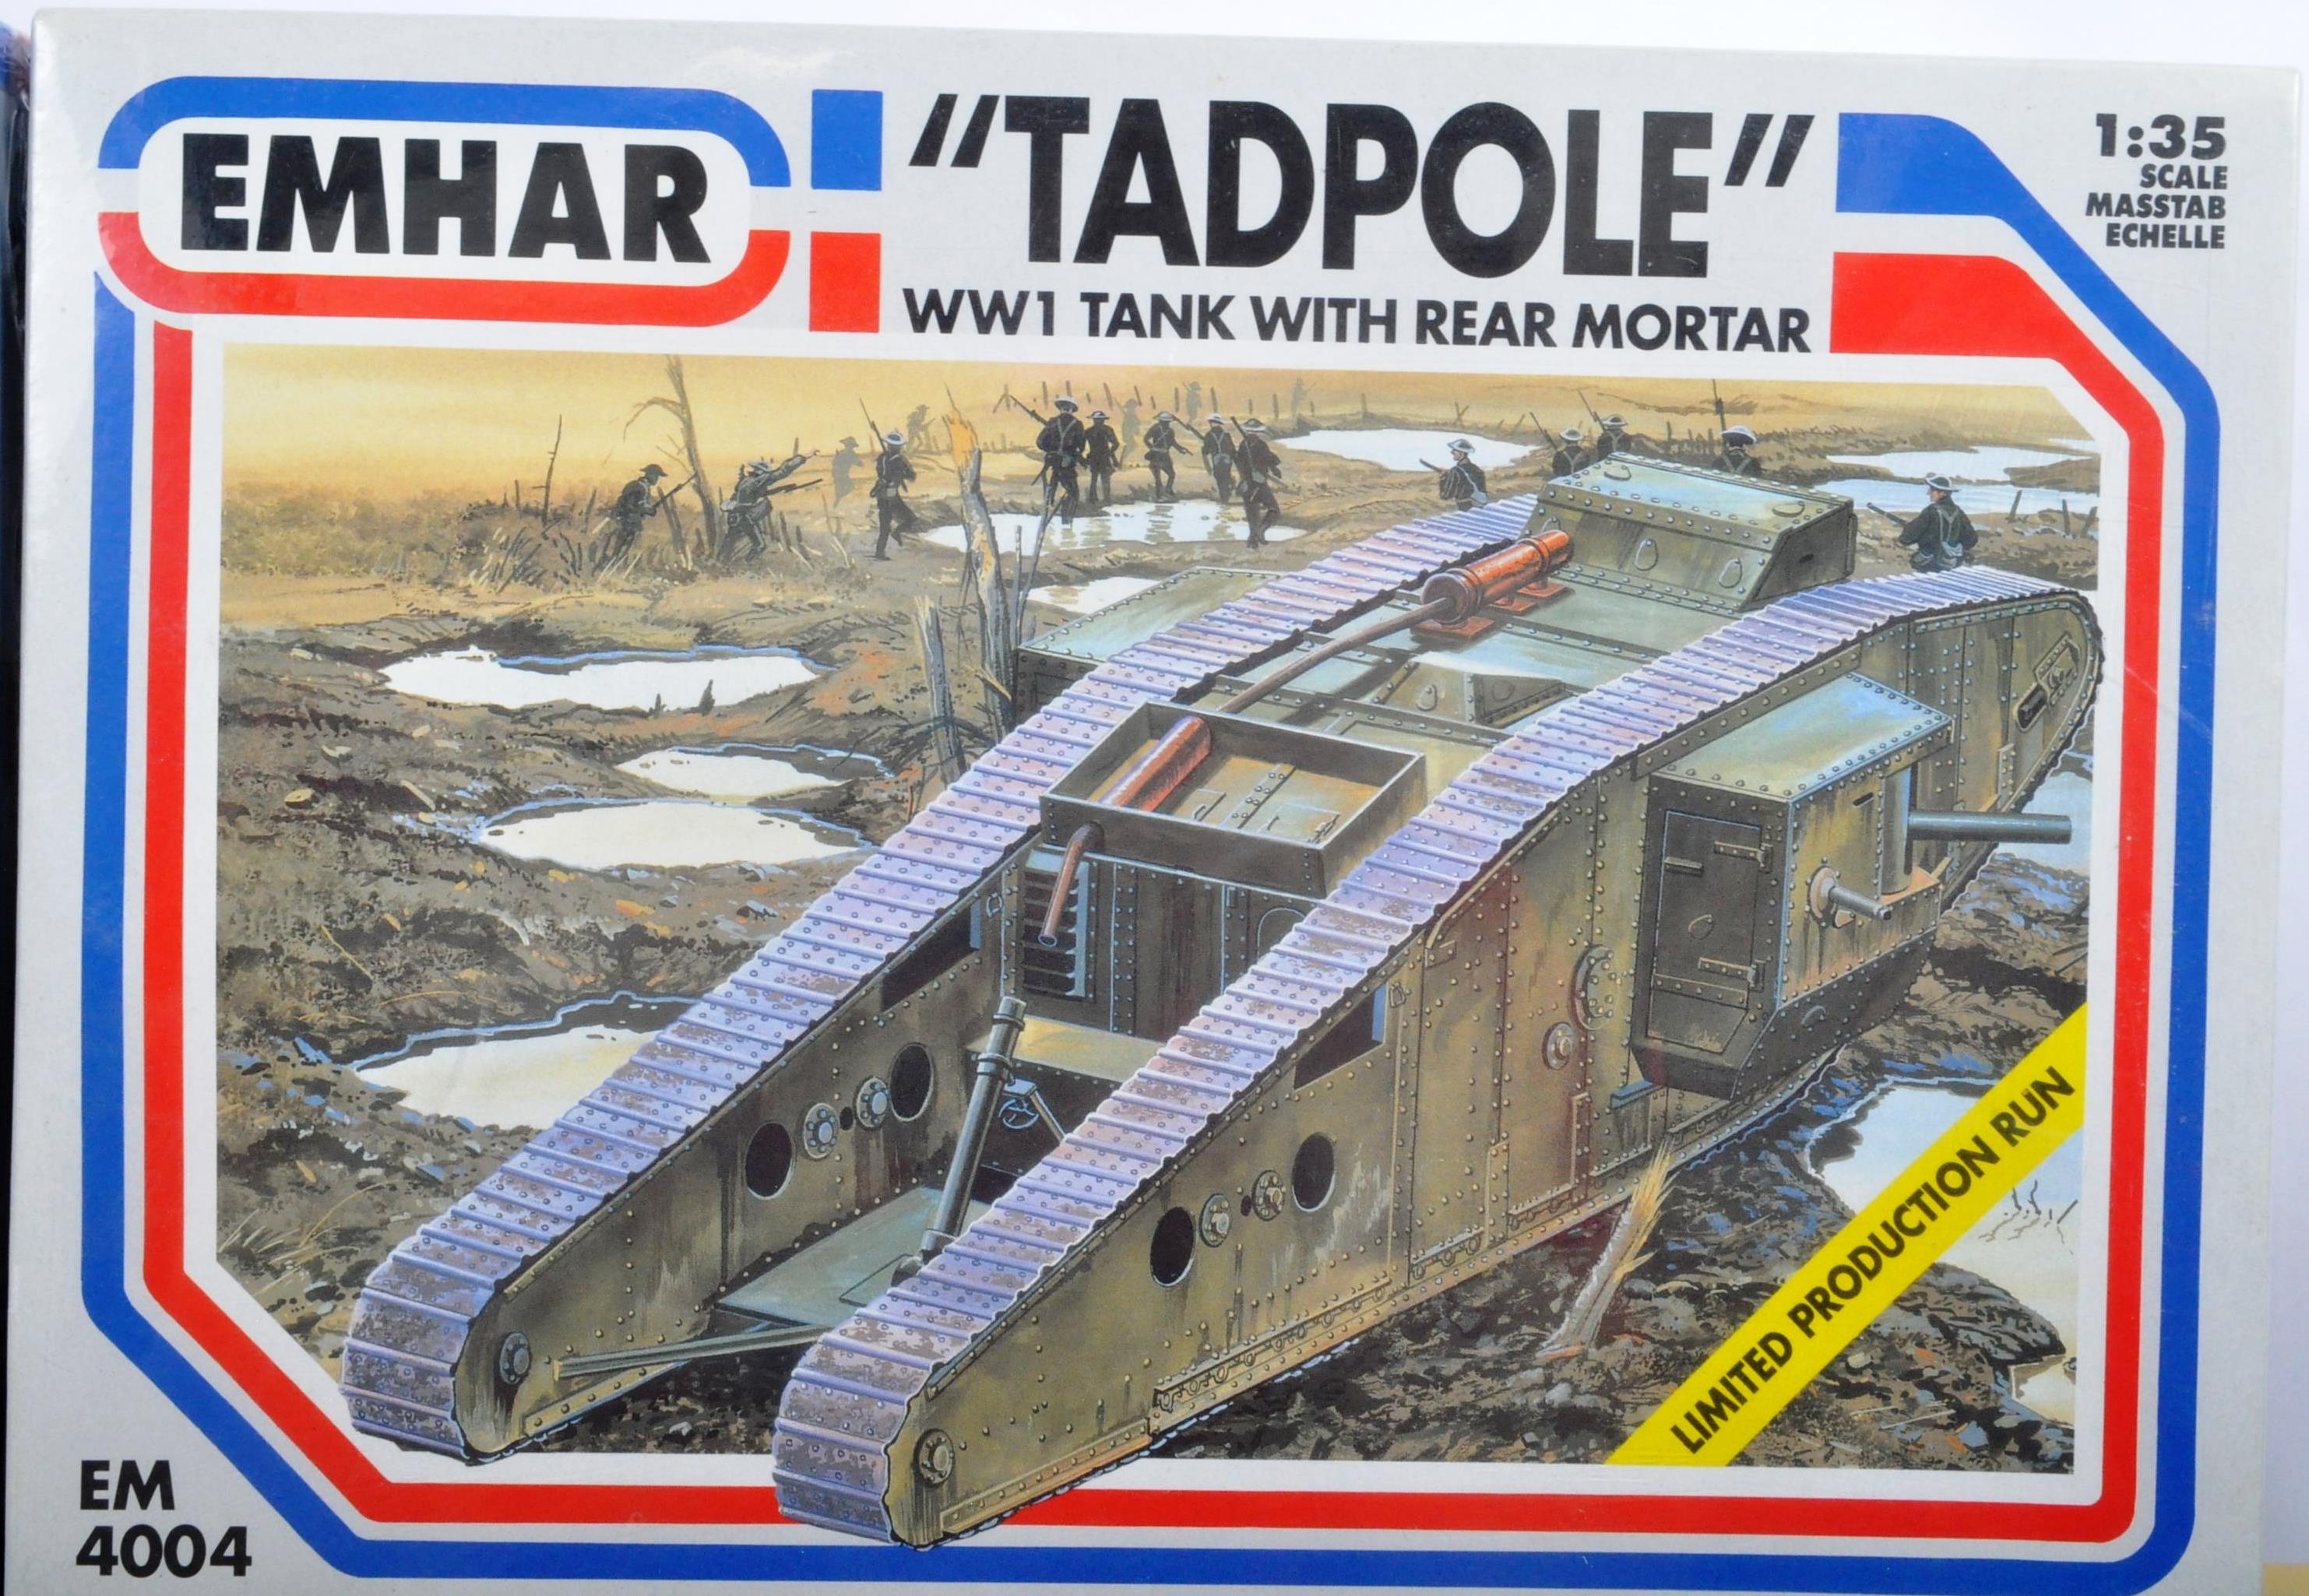 COLLECTION OF ITALERI & EMHAR FACTORY SEALED PLASTIC MODEL KITS - Image 4 of 6